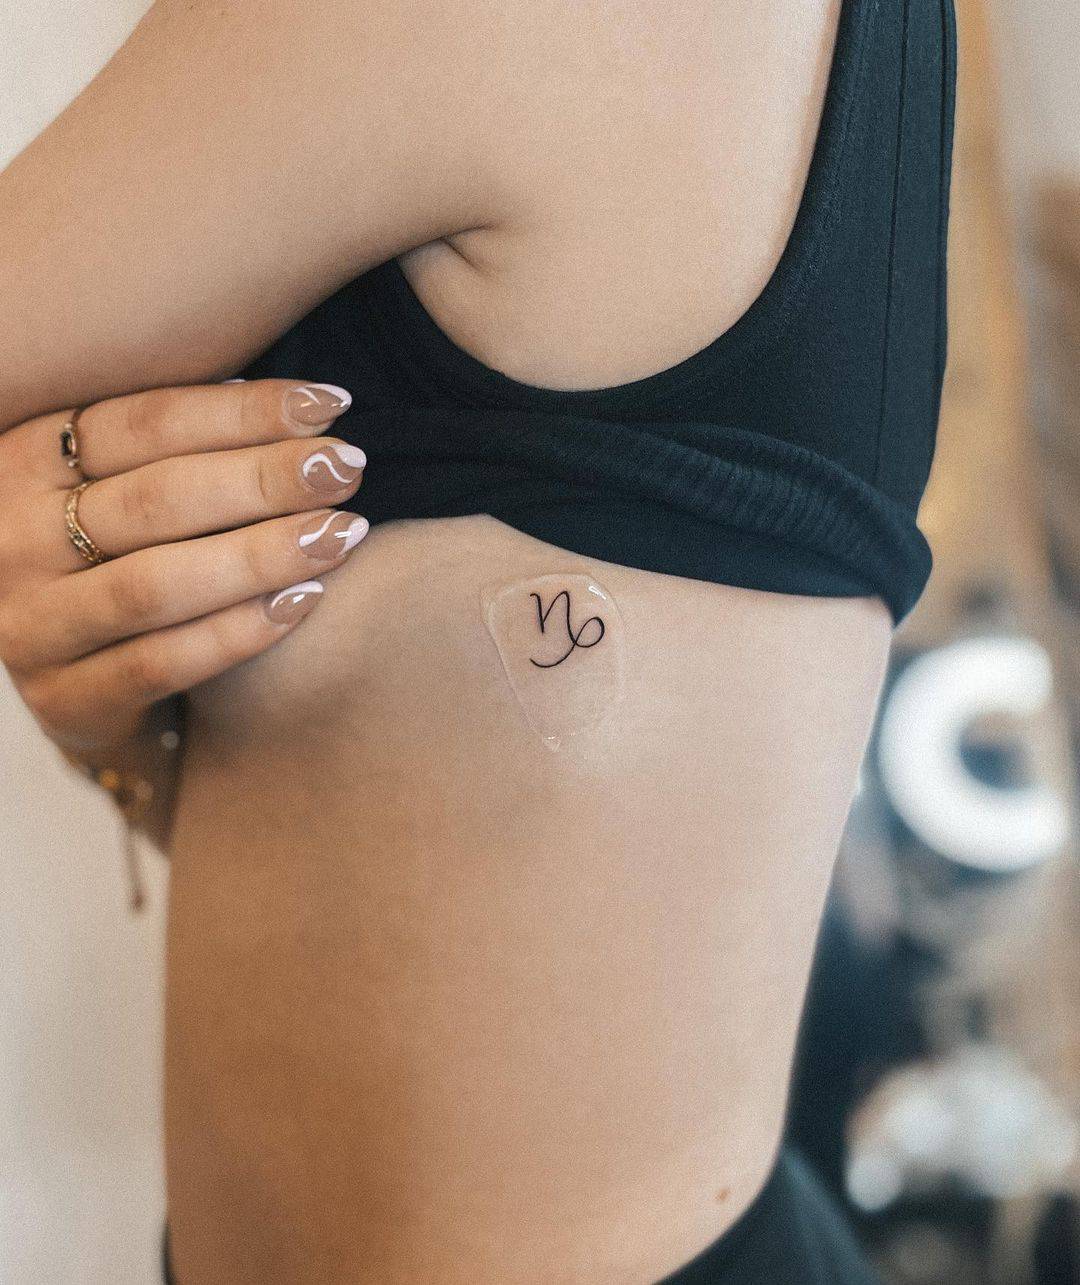 Can I get a tattoo of Capricorn if I am Virgo? - Quora